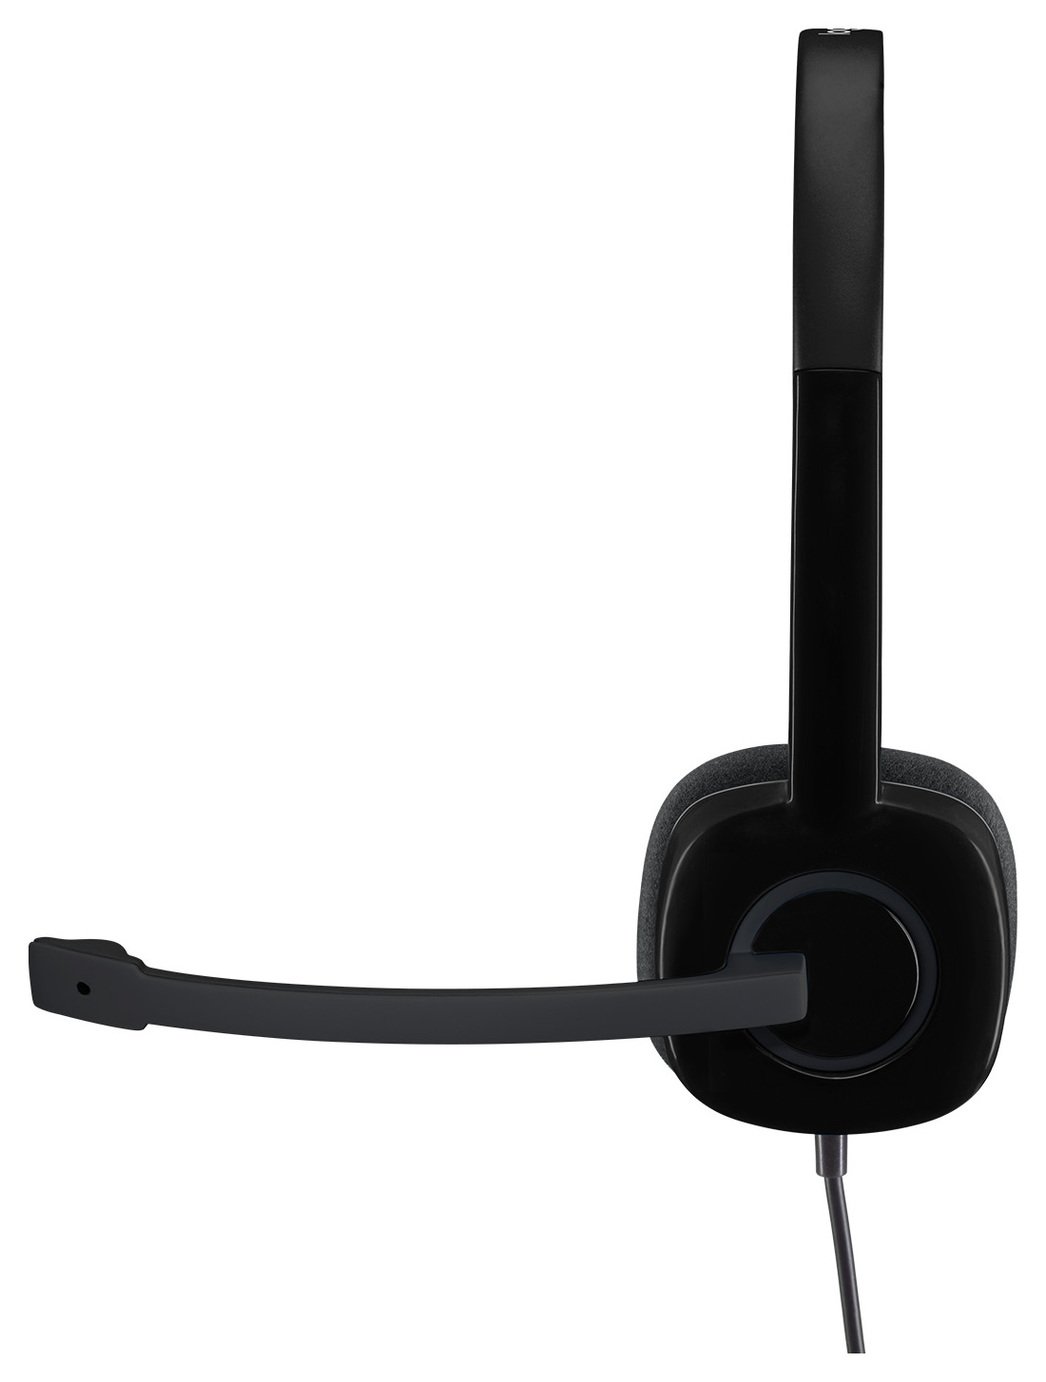 Logitech H150 Stereo PC Headset Review